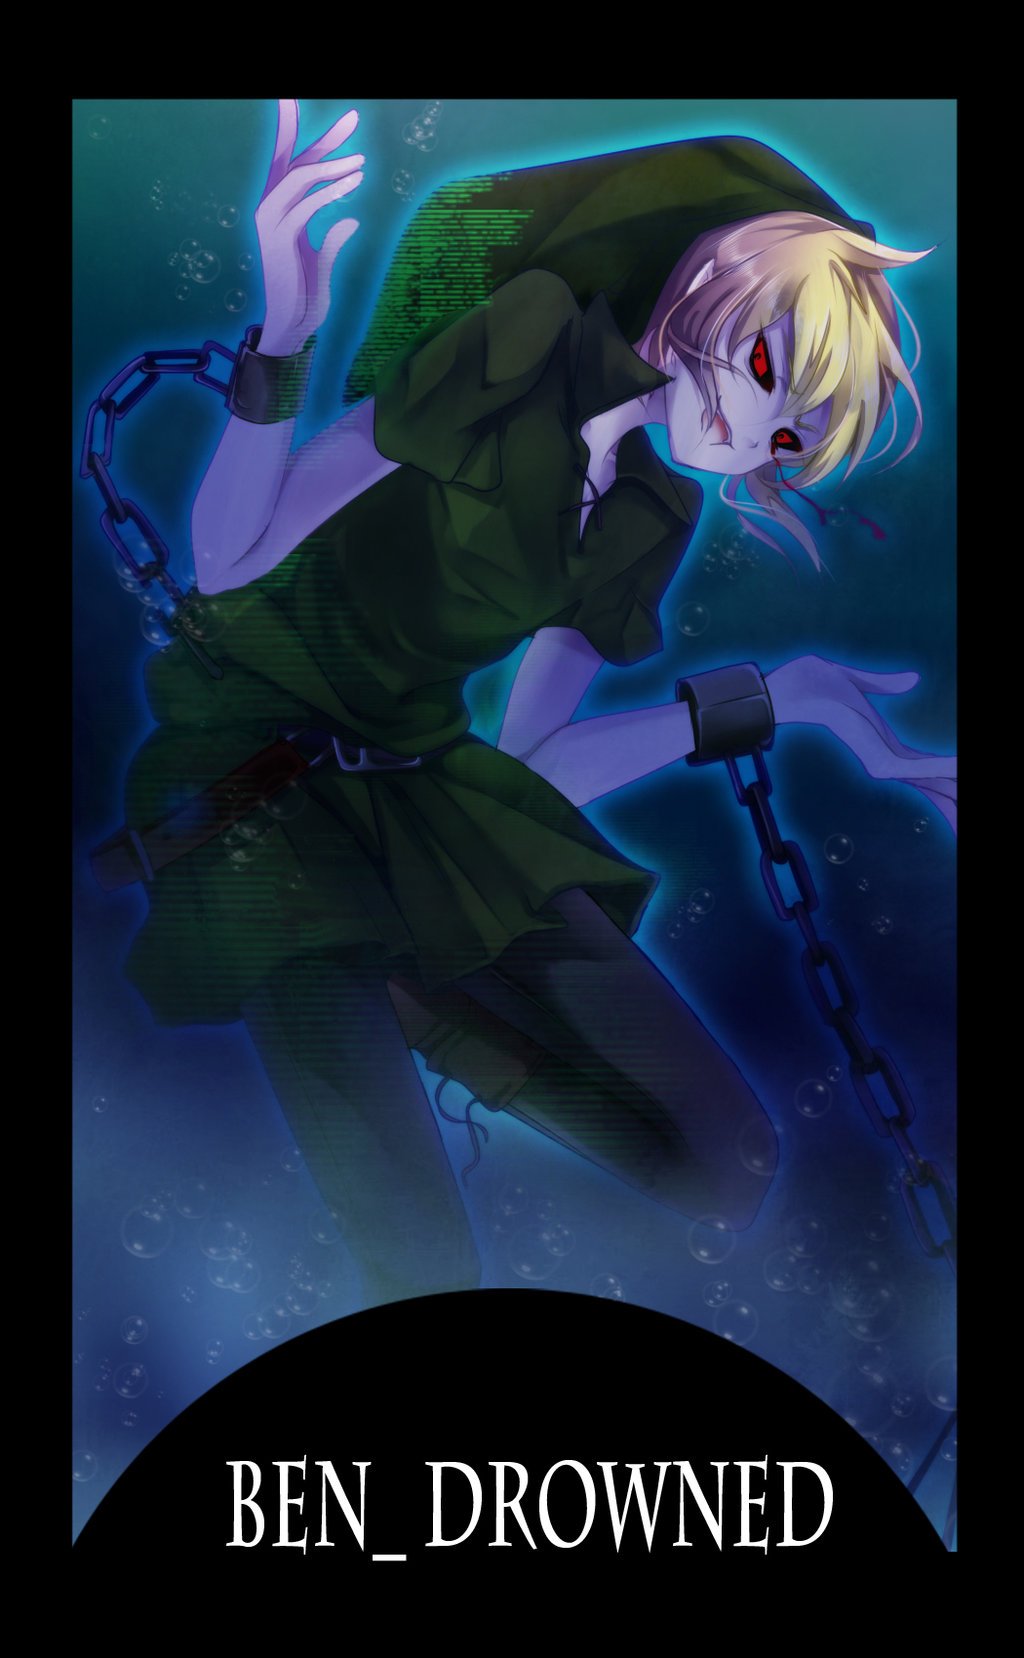 creepy pasta card 5th BEN Drowned by gatanii69 on